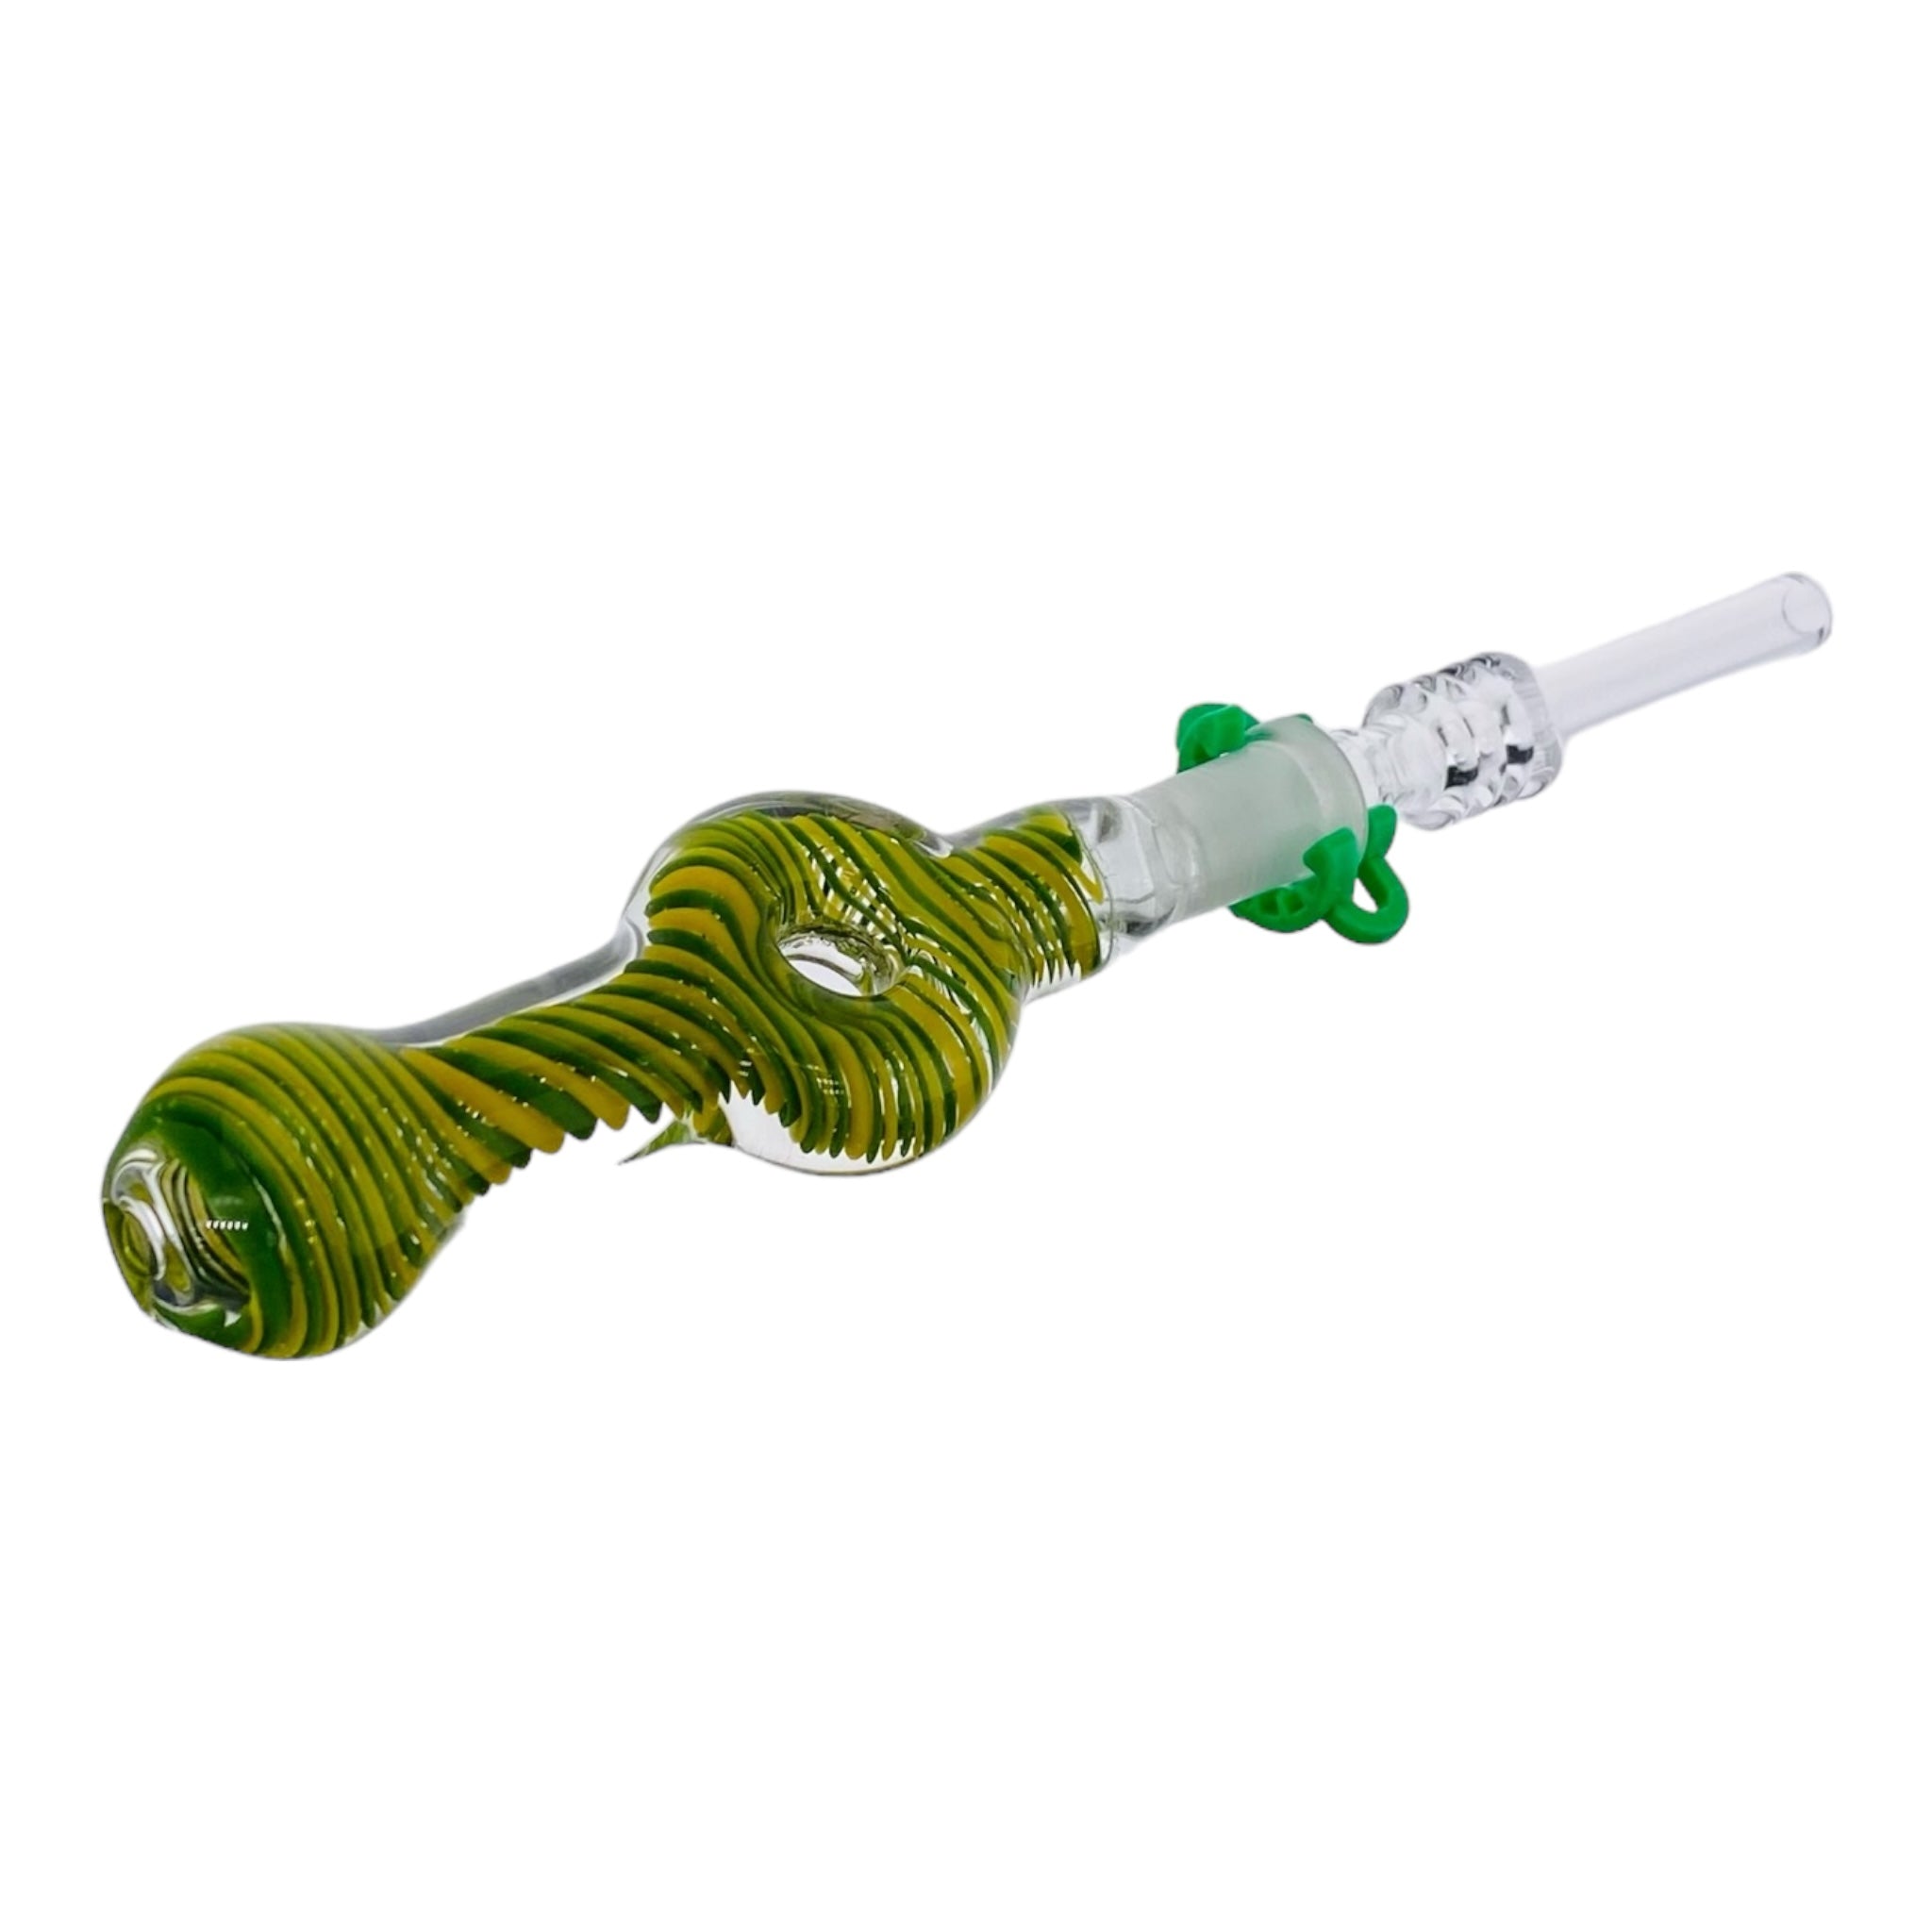 10mm Nectar Collector - Green And Yellow Inside Out Spiral Donut With Quartz Tip